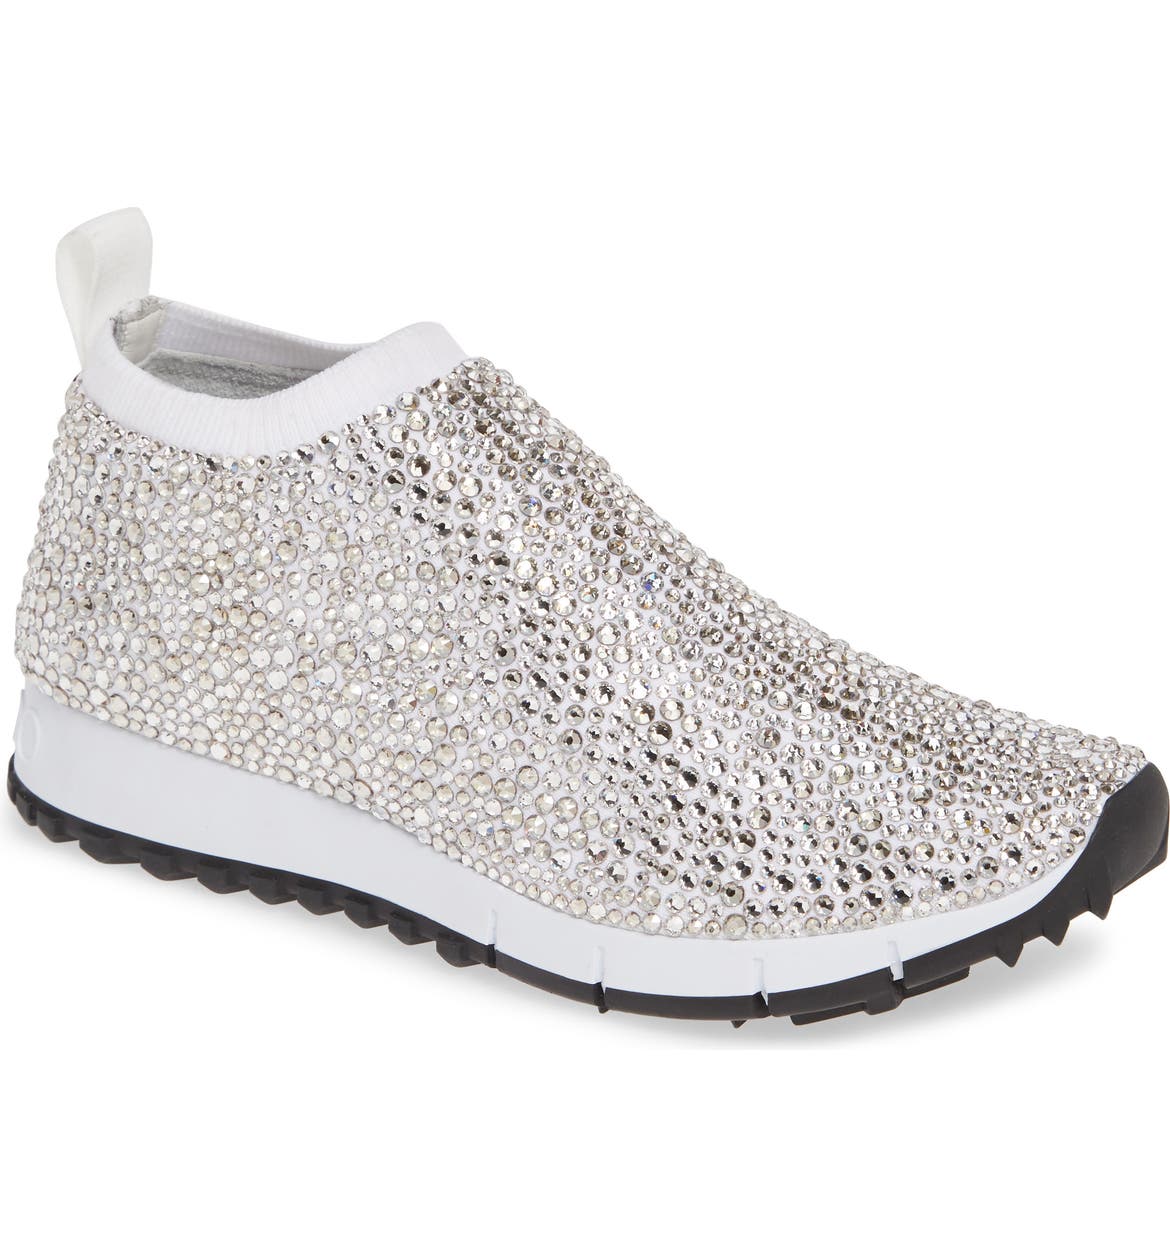 JIMMY CHOO Nowary Crystal Embellished Slip-On Sneaker, Main, color, WHITE/ CRYSTAL